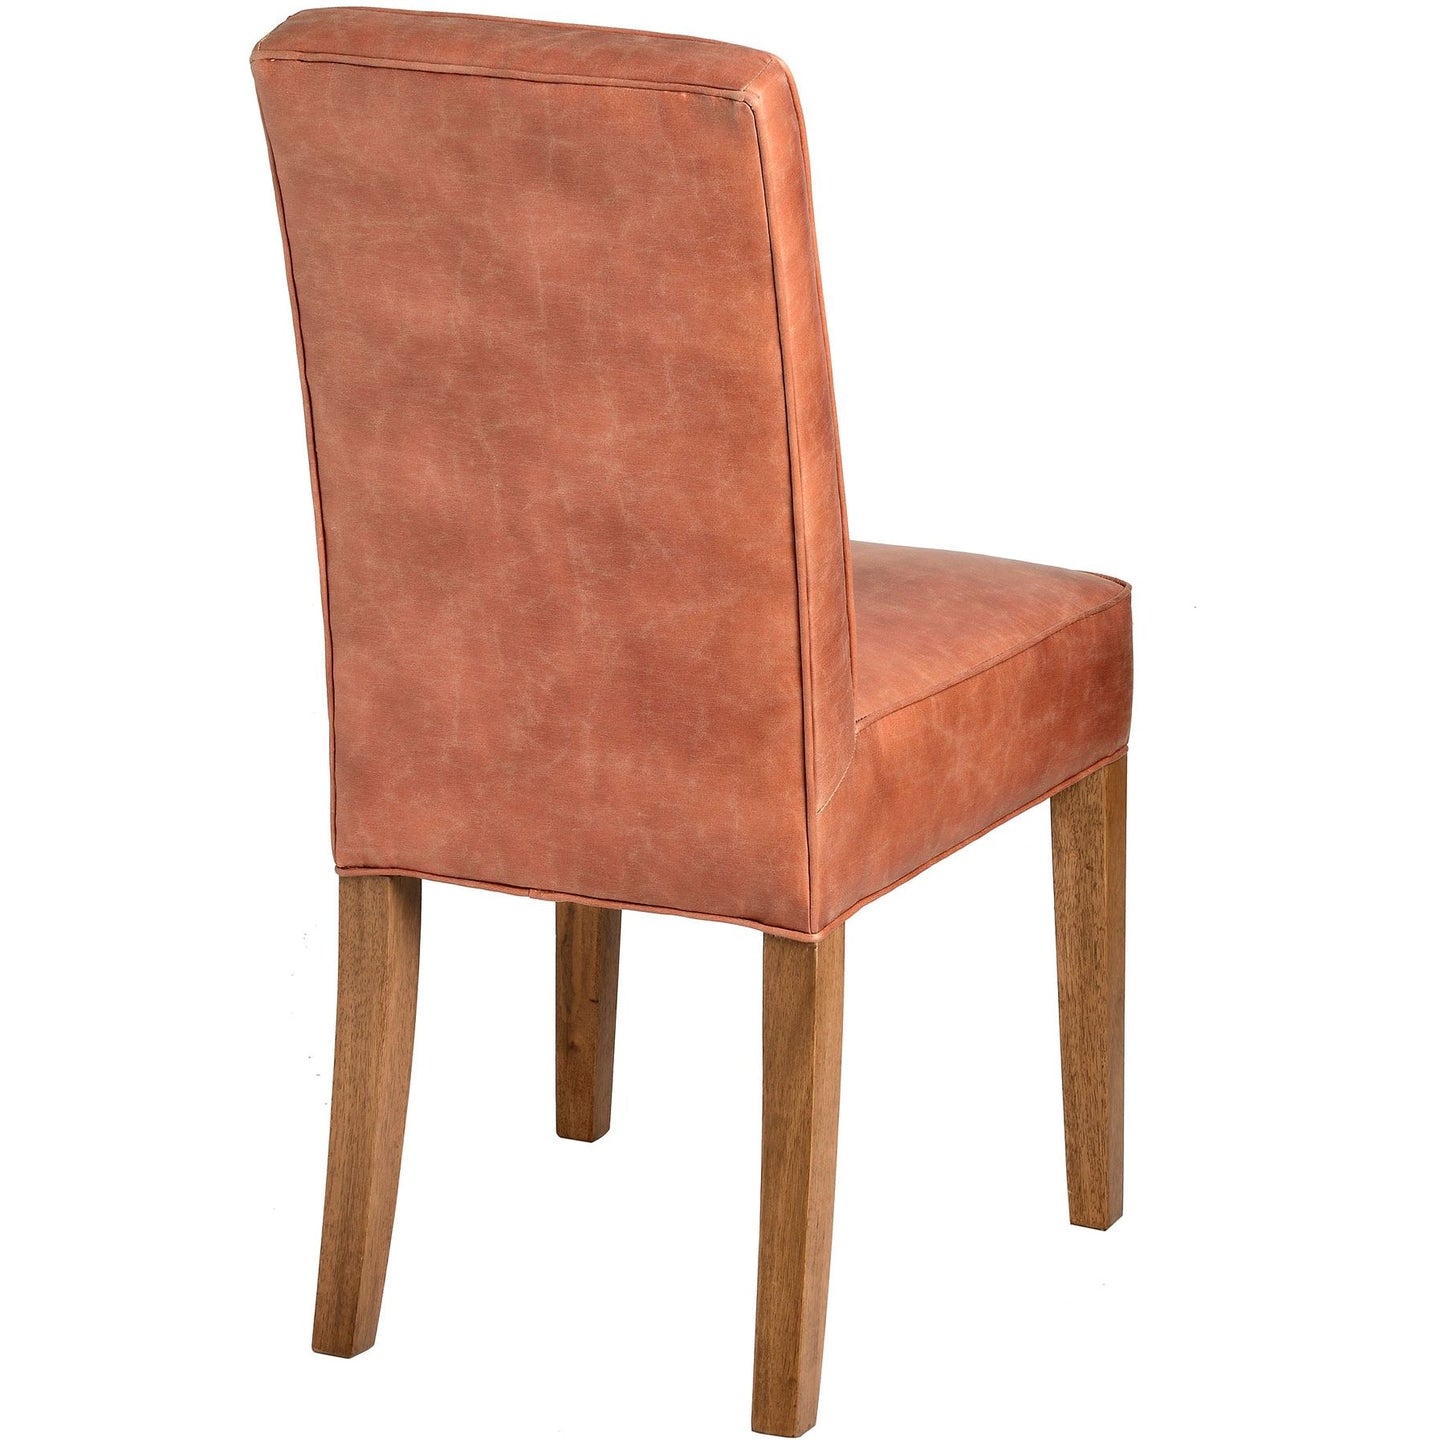 Tan Faux Leather Dining Chair - Ashton and Finch